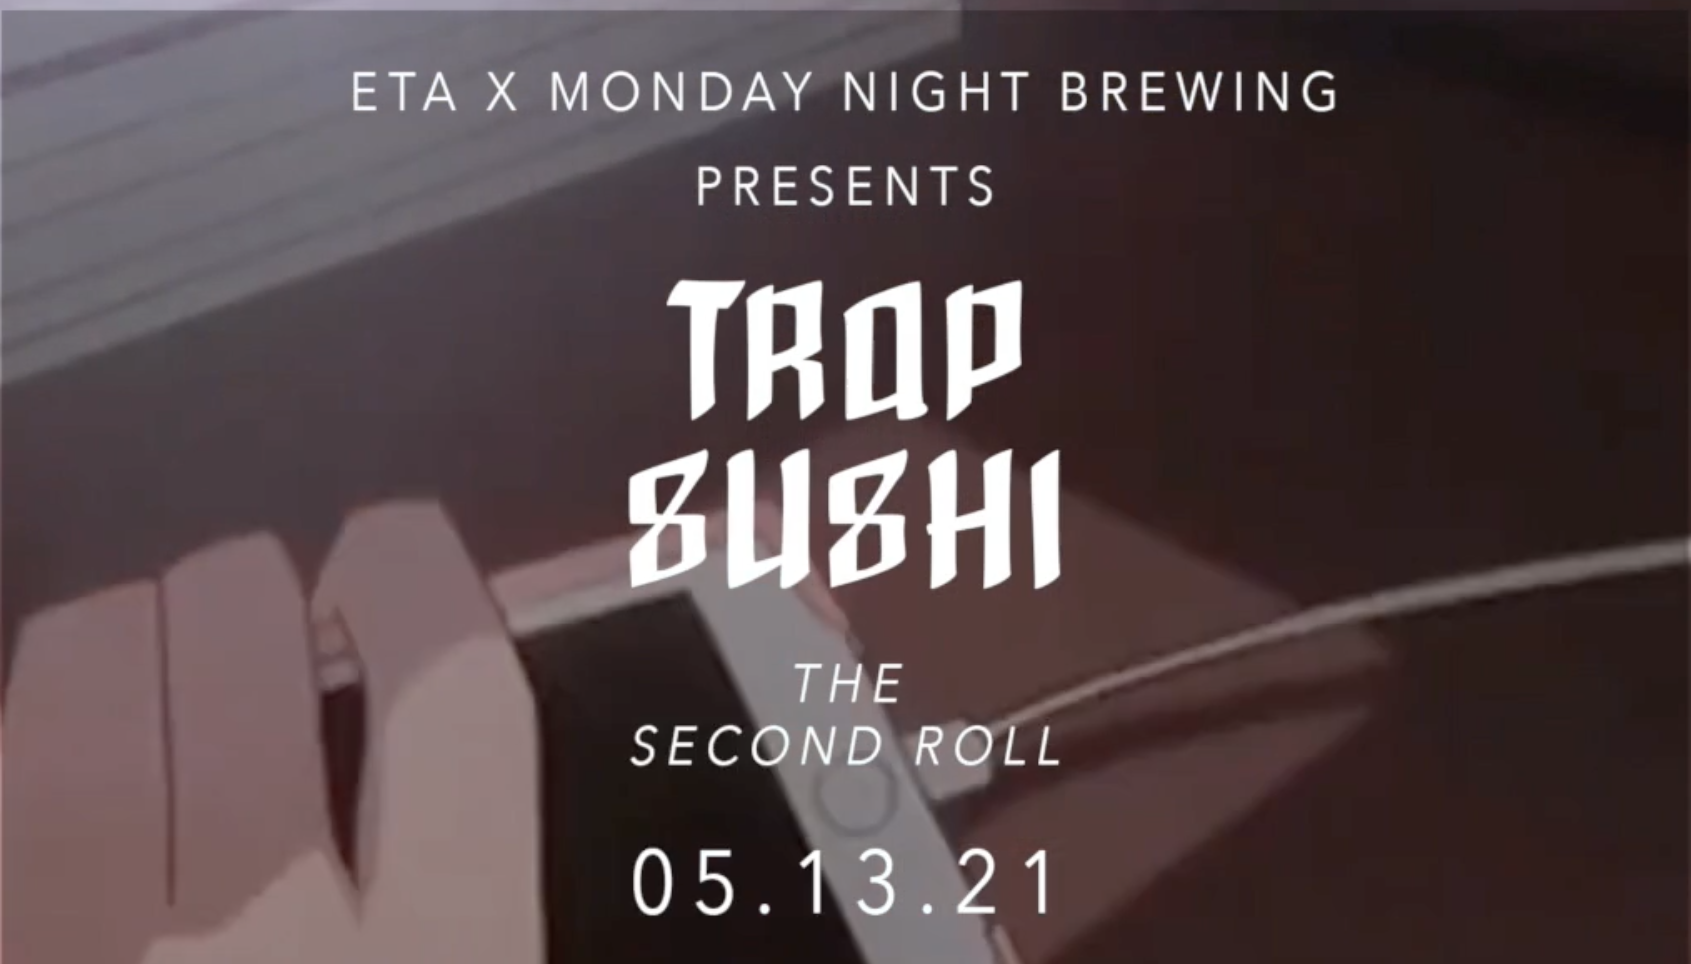 Trap Sushi event flyer